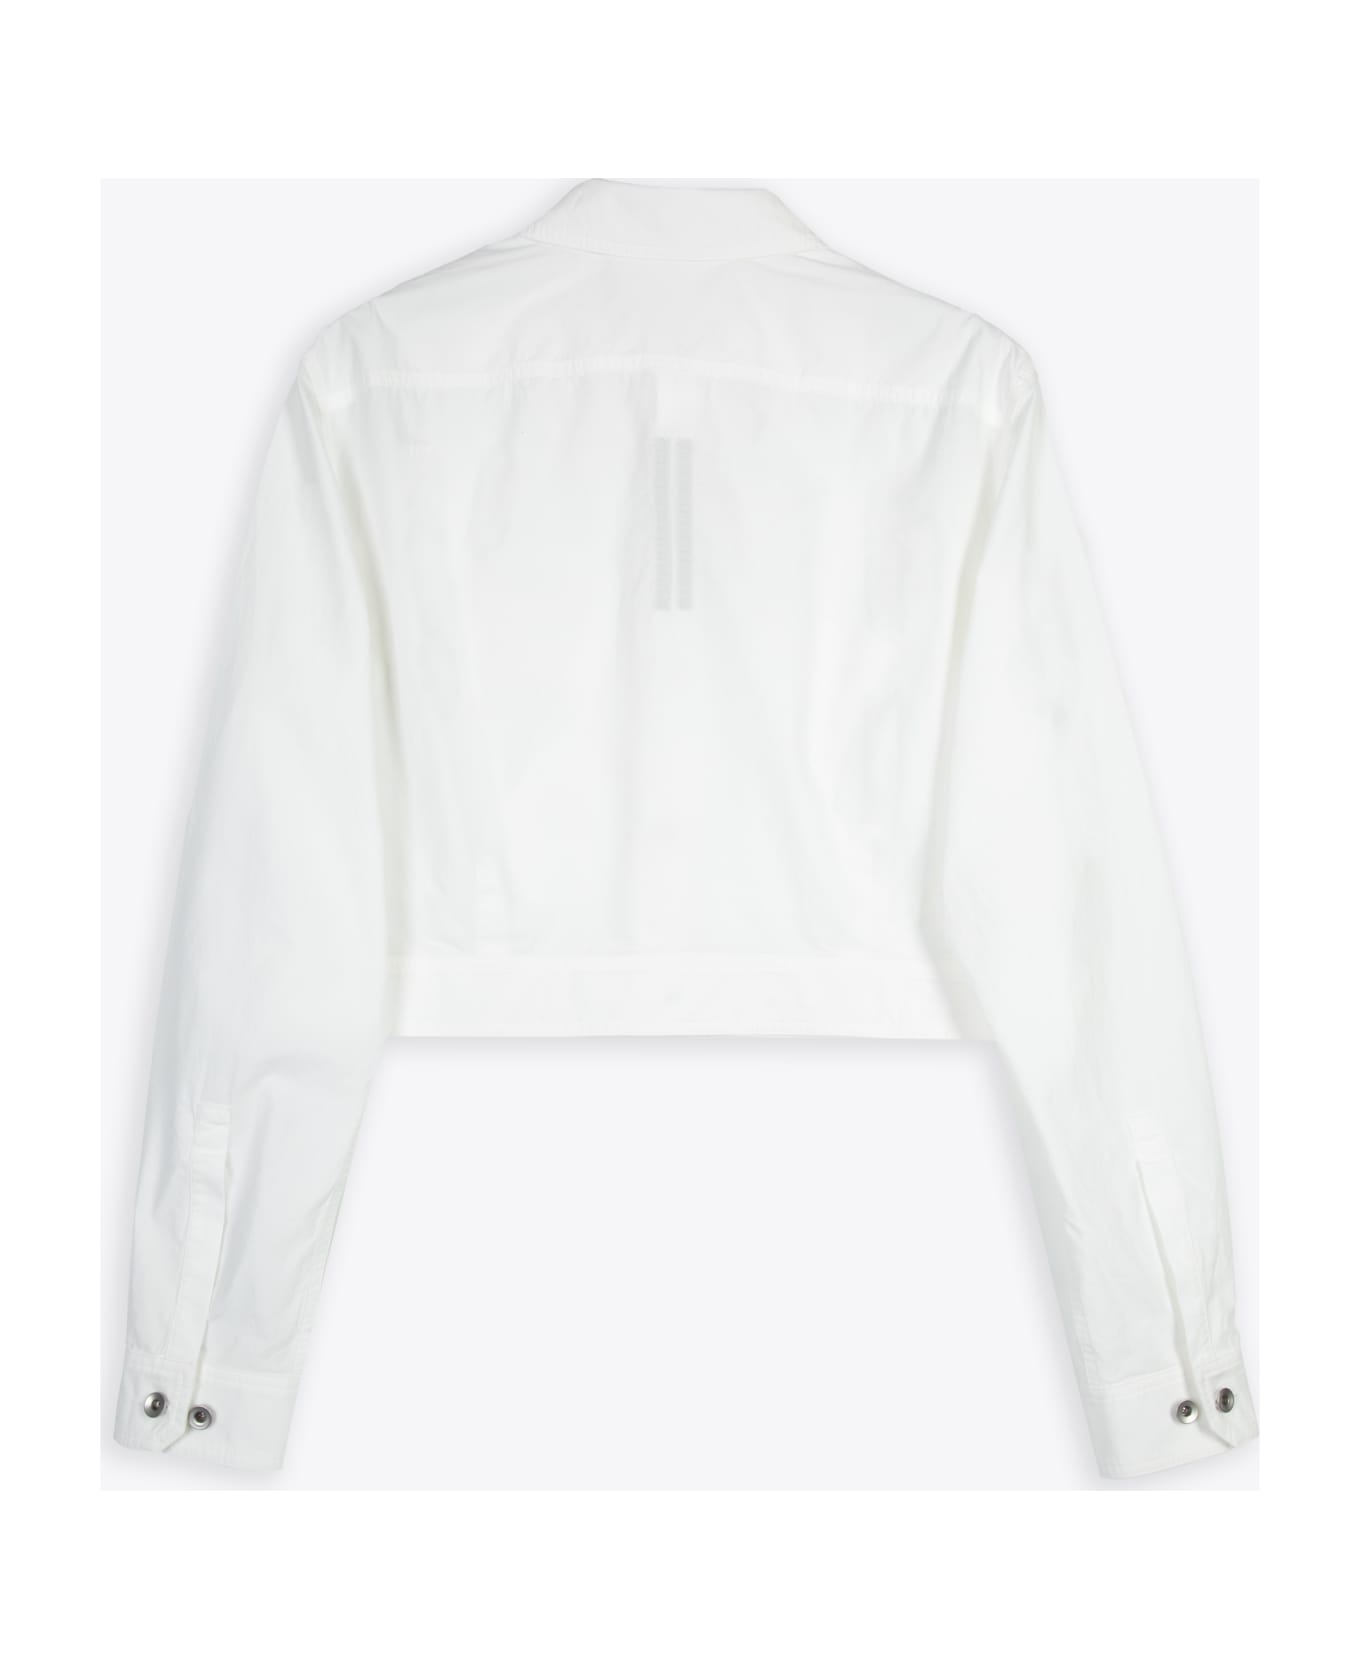 DRKSHDW Cape Sleeve Cropped Outershirt White poplin cotton outershirt - Cape sleeve cropped outershirt - Latte